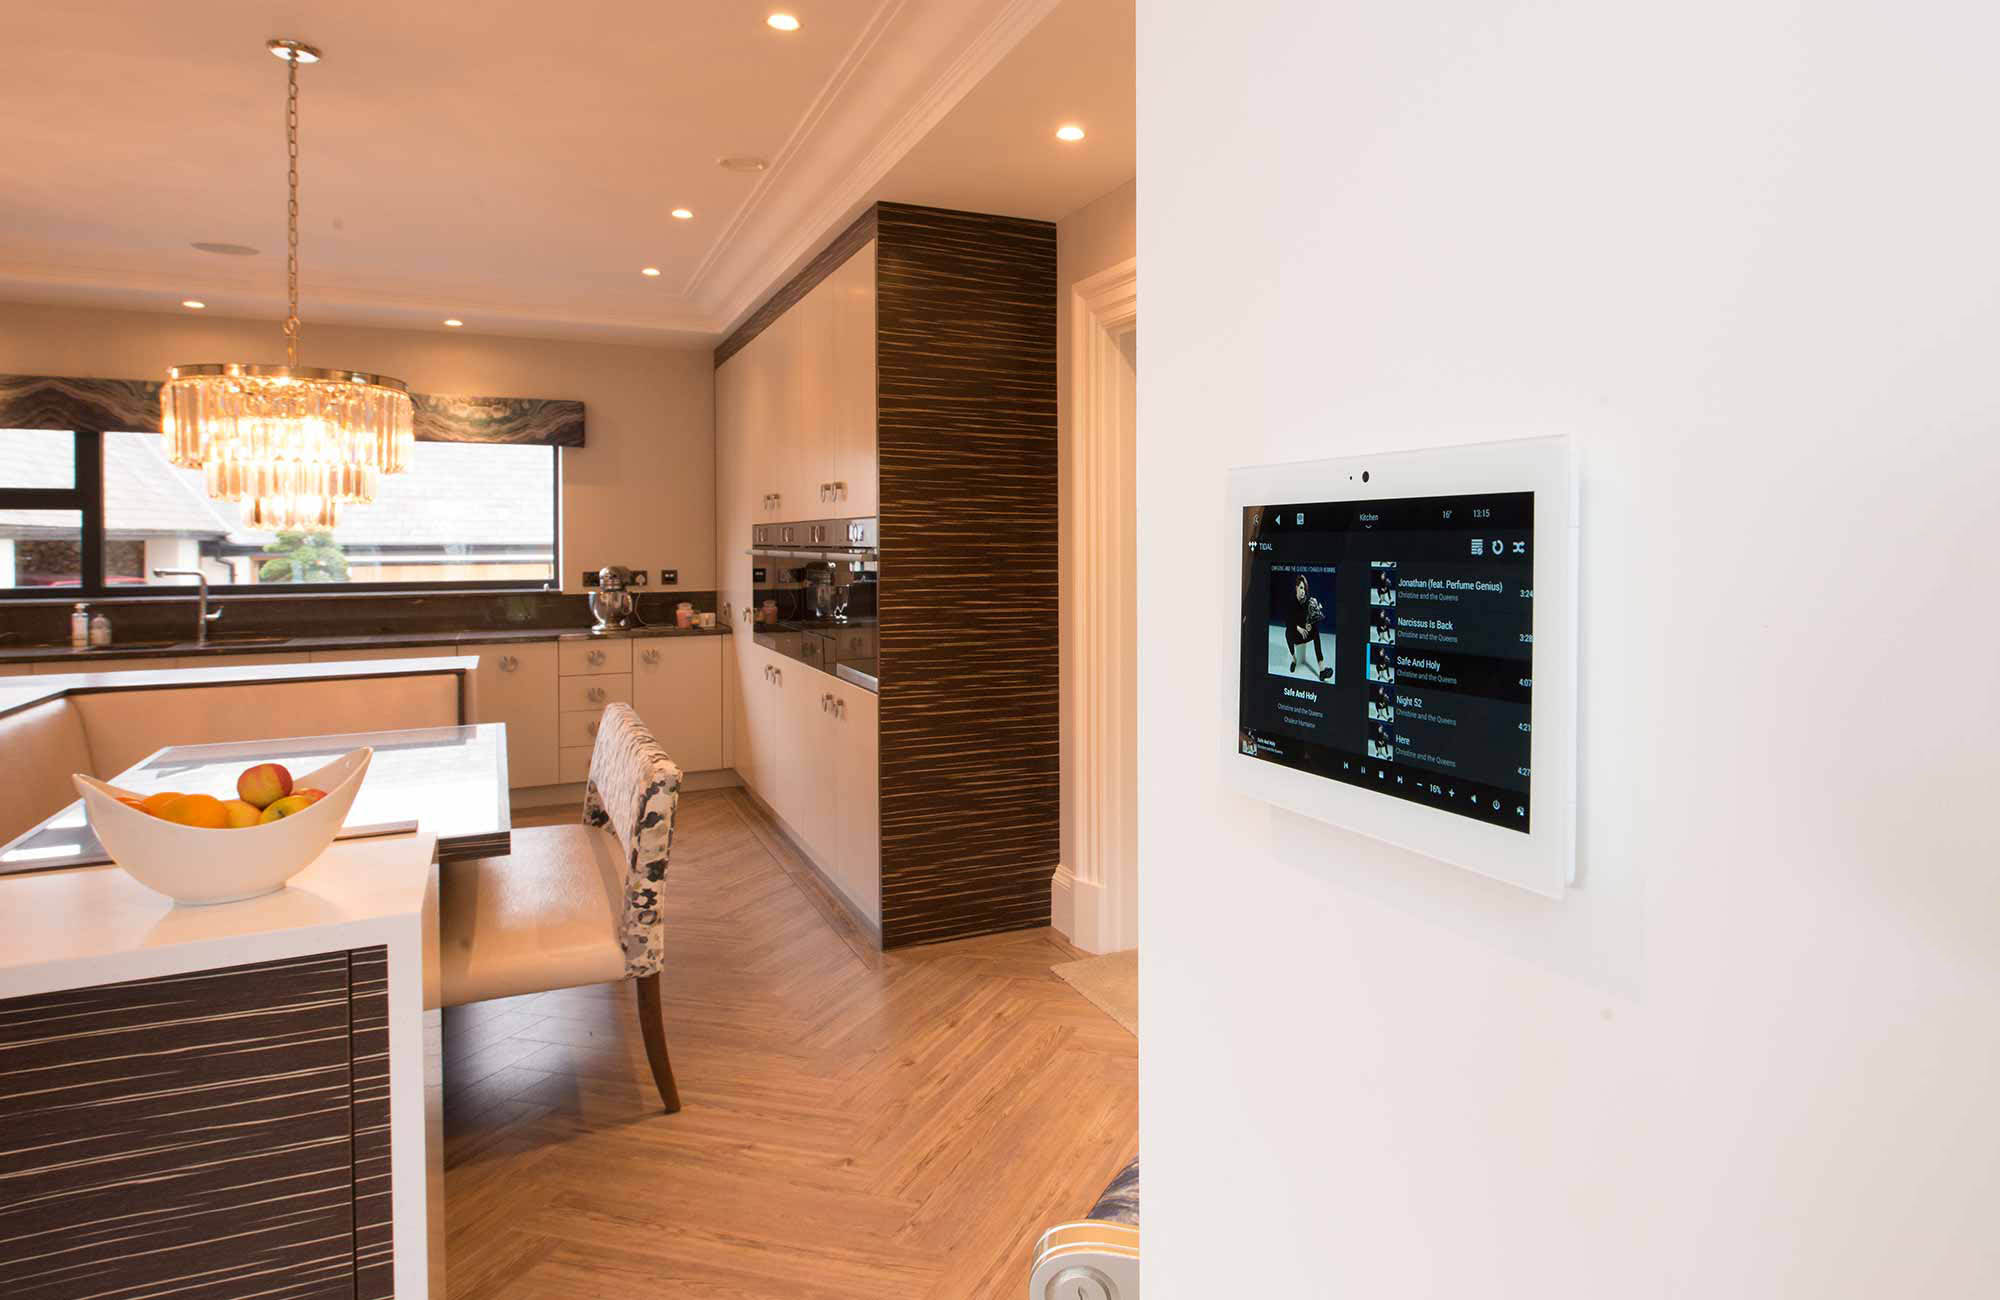 Smart Home Automation Systems Details Image 1